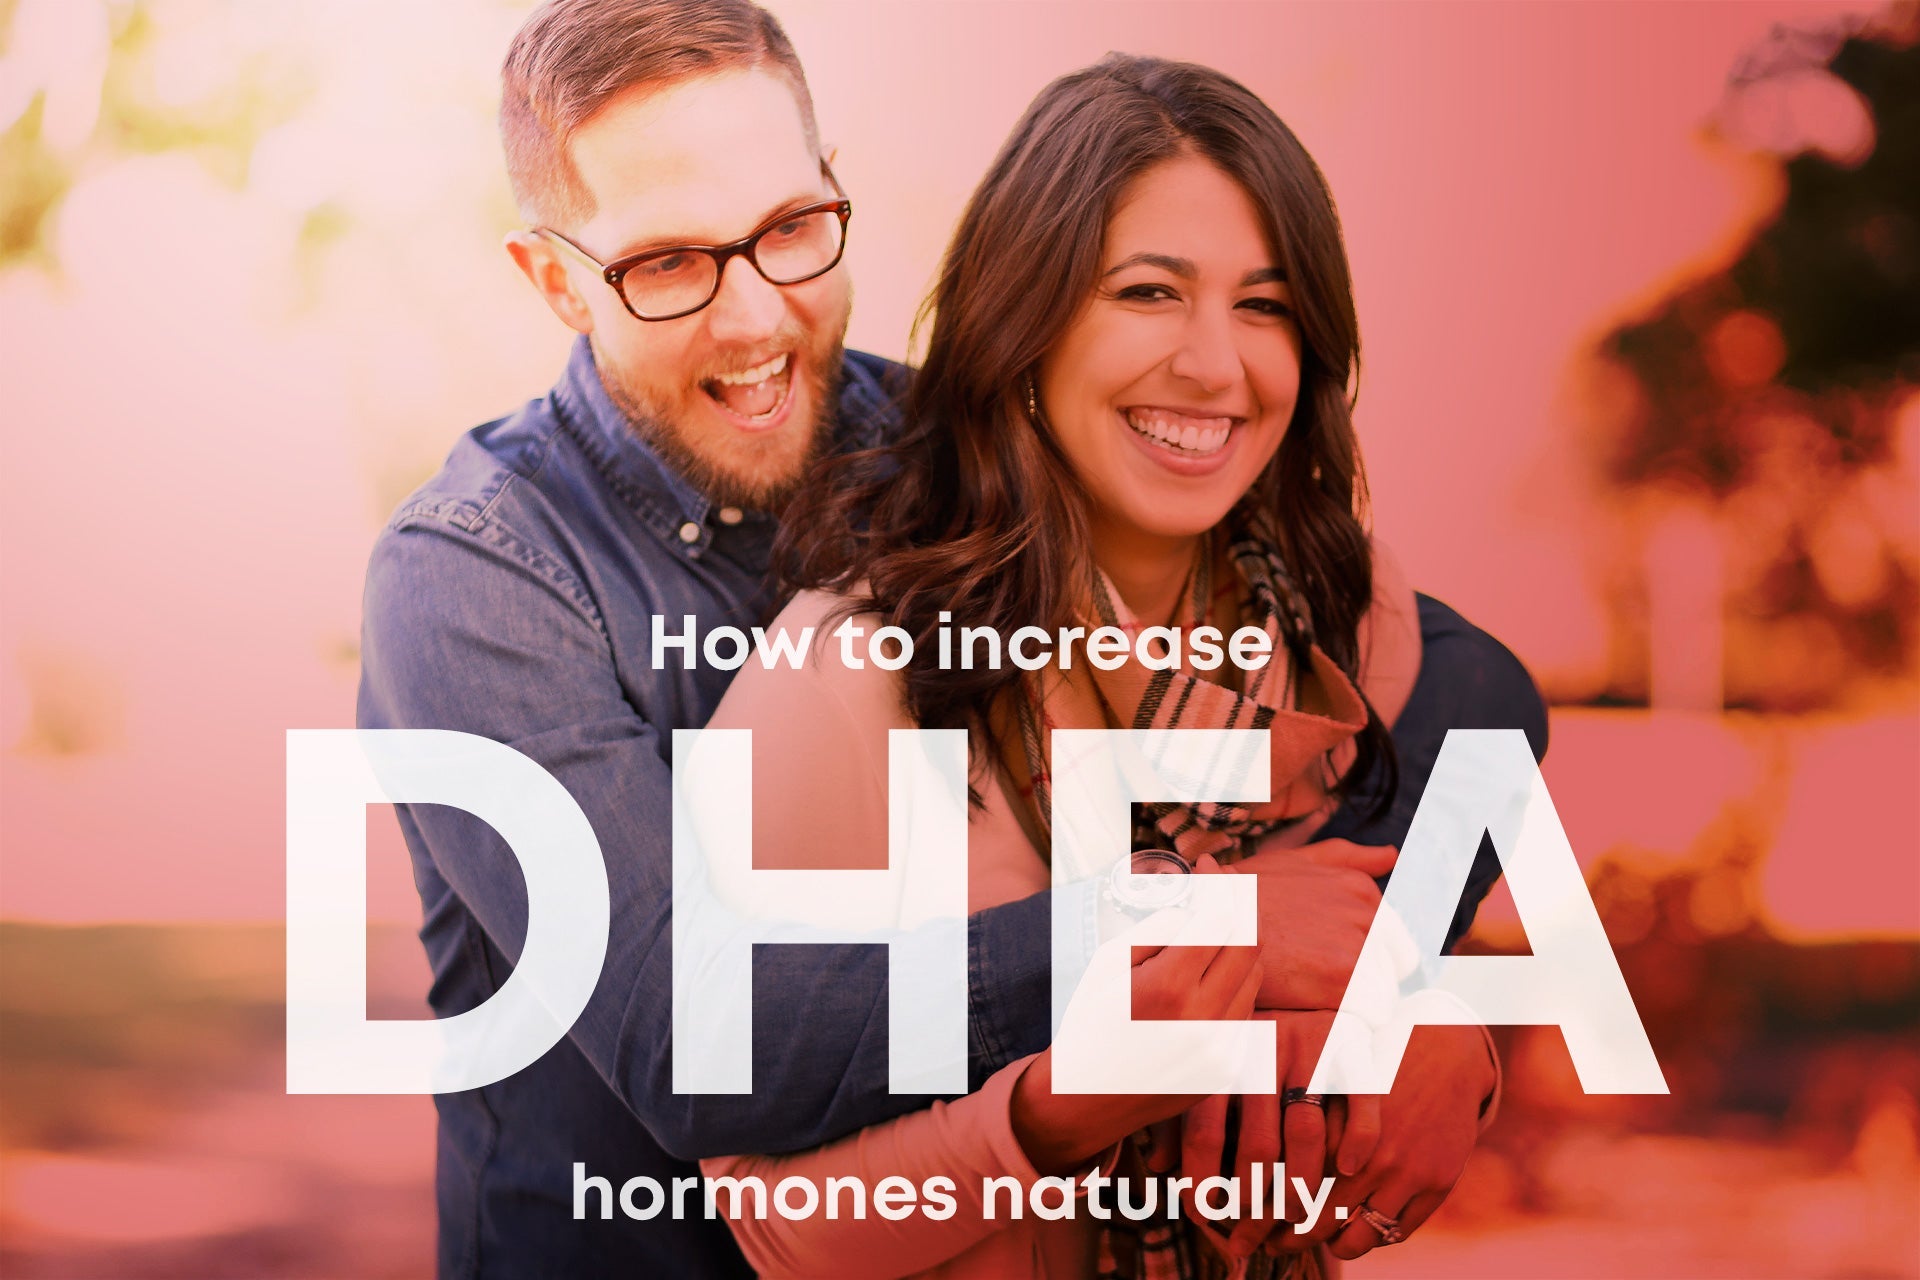 A couple horny and happy after taking HDEA-supplement-how-to-increase-HDEA-naturally